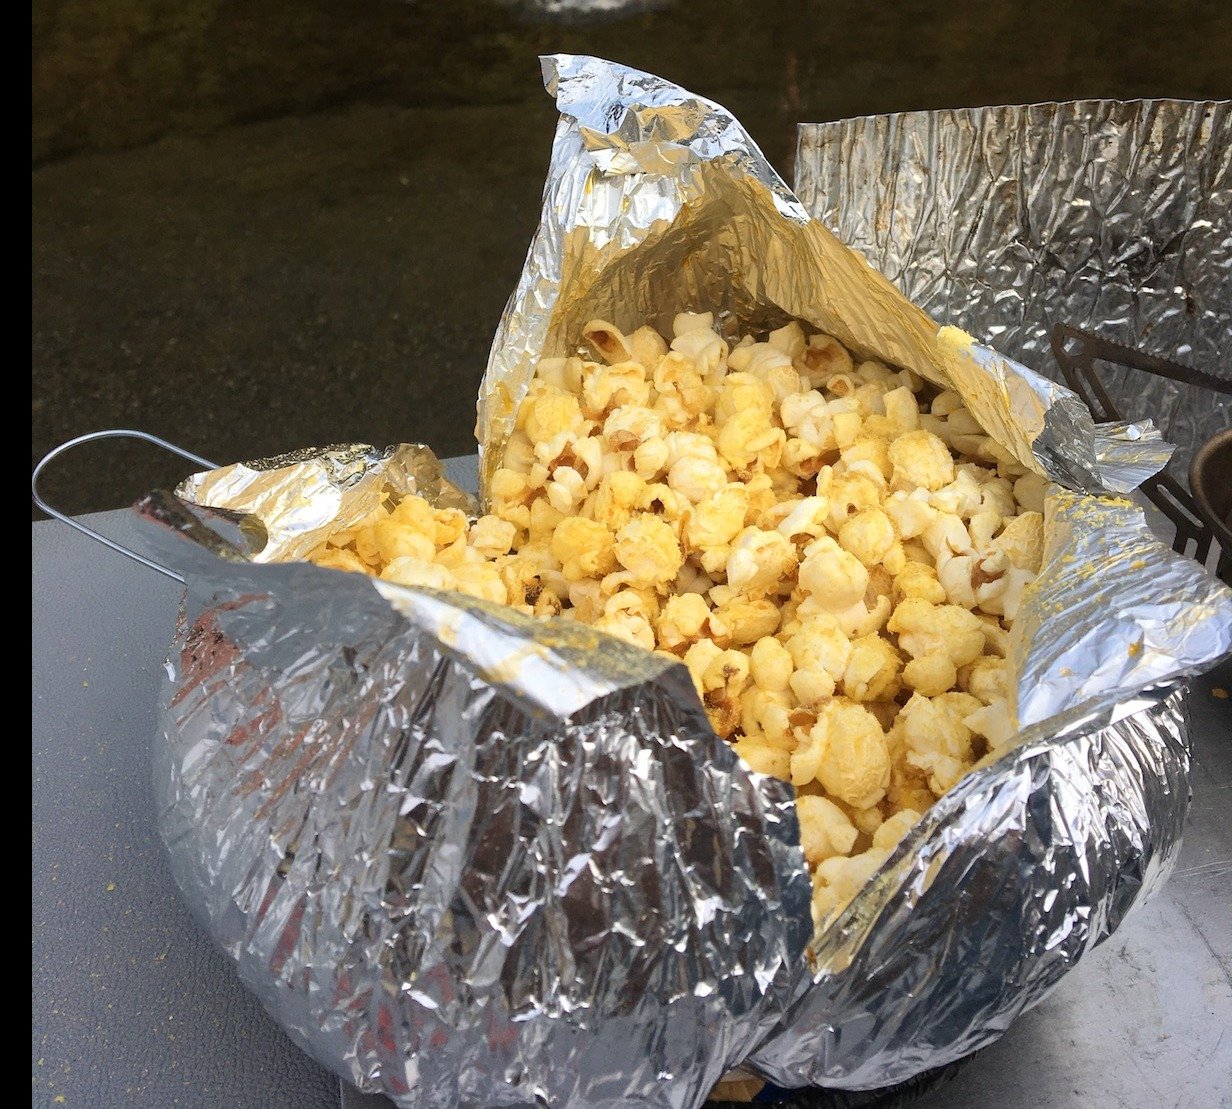 Popcorn wrapped in tinfoil